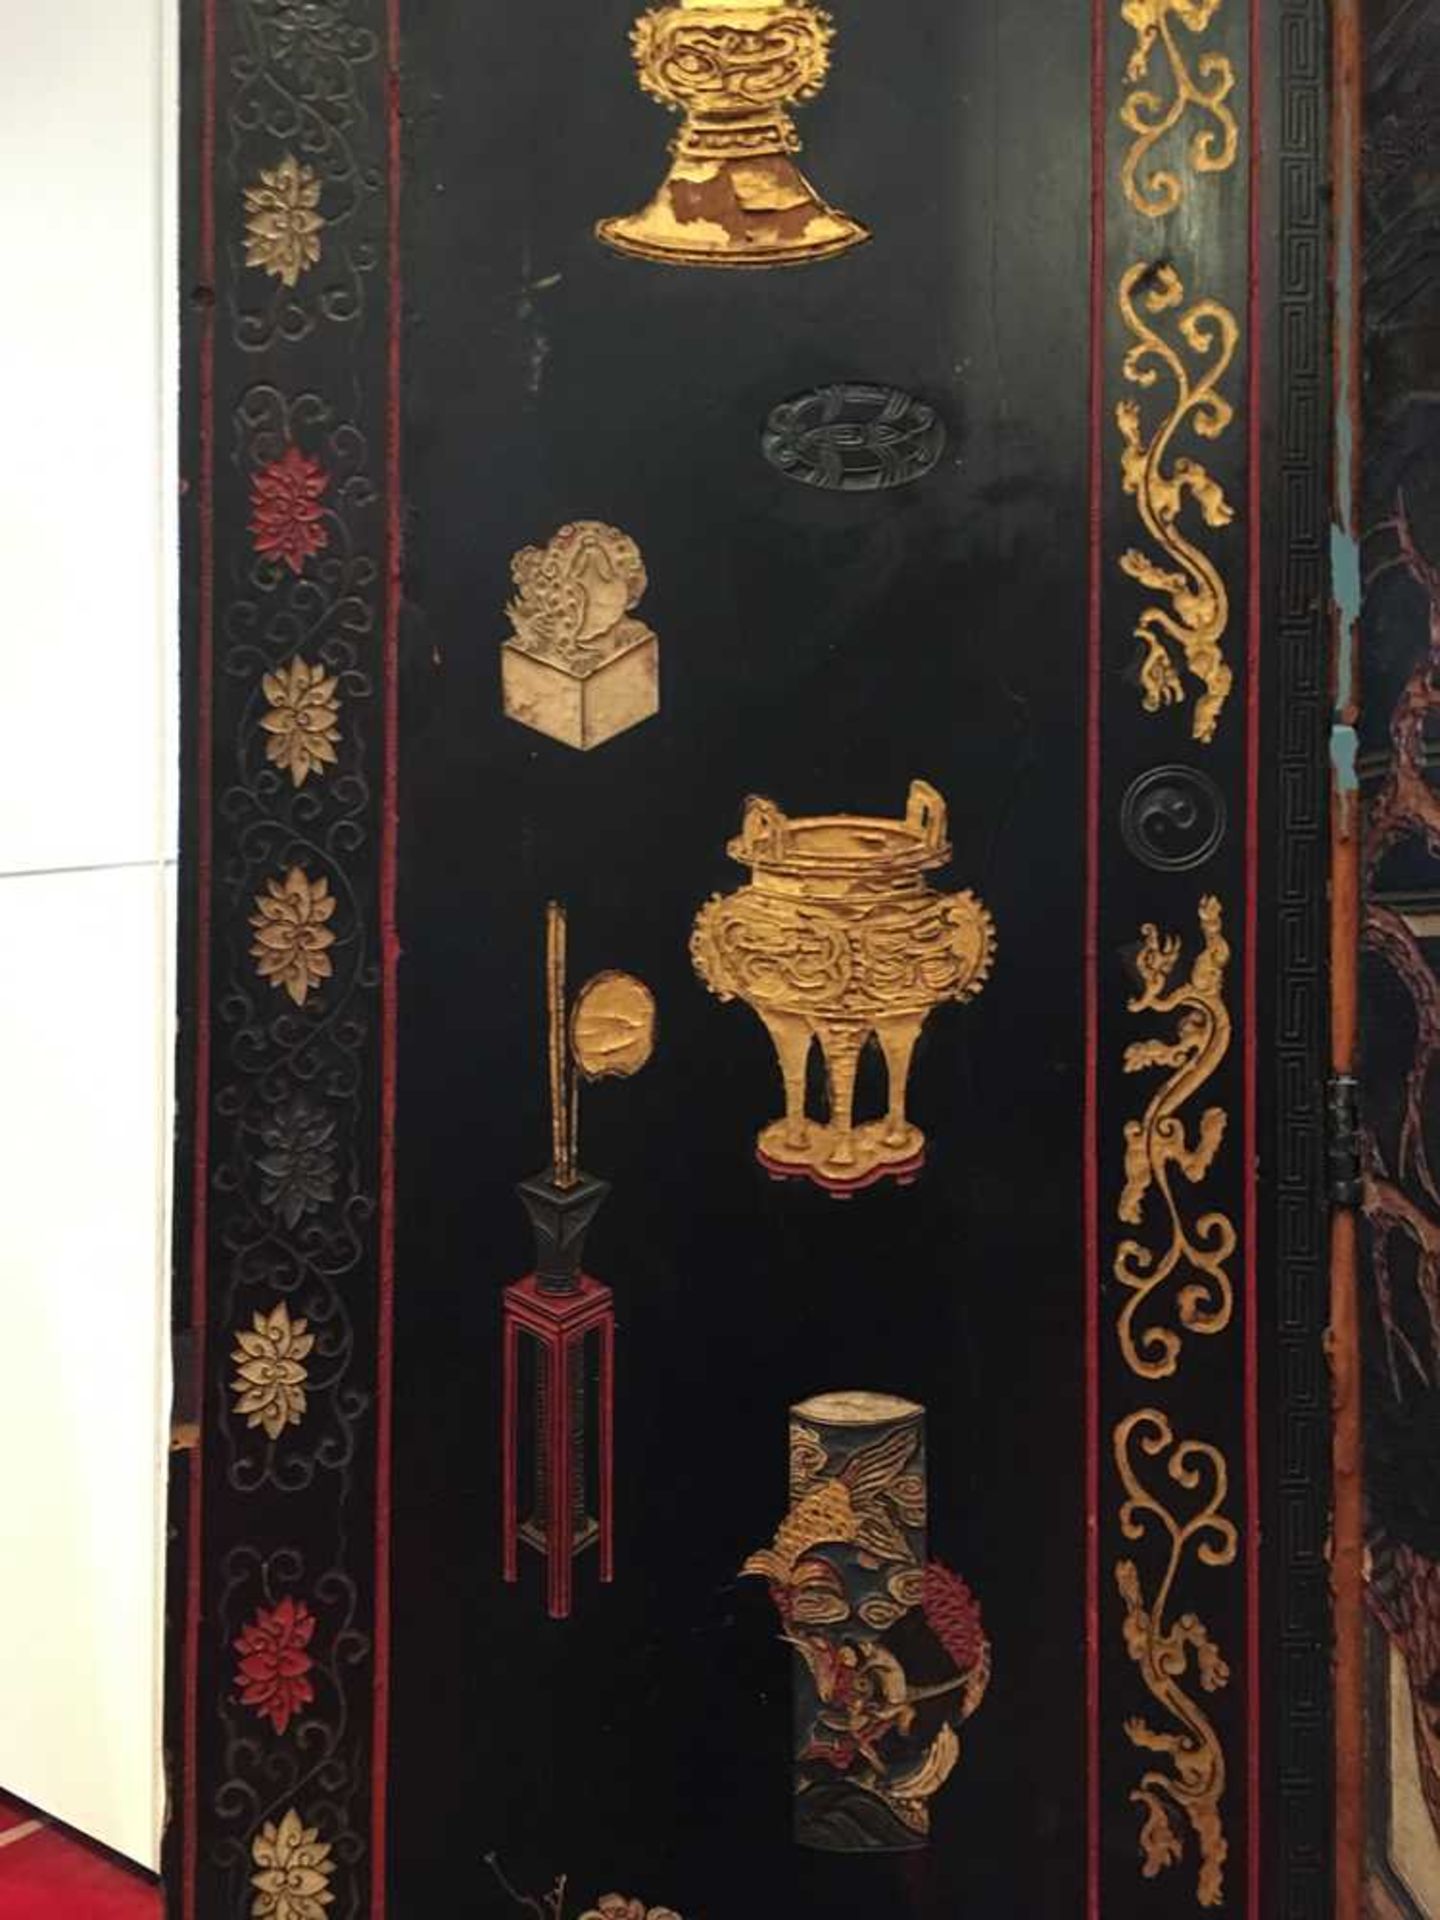 A CHINESE COROMANDEL BLACK LACQUER TWELVE-PANEL SCREEN QING DYNASTY, 18TH CENTURY - Image 8 of 72